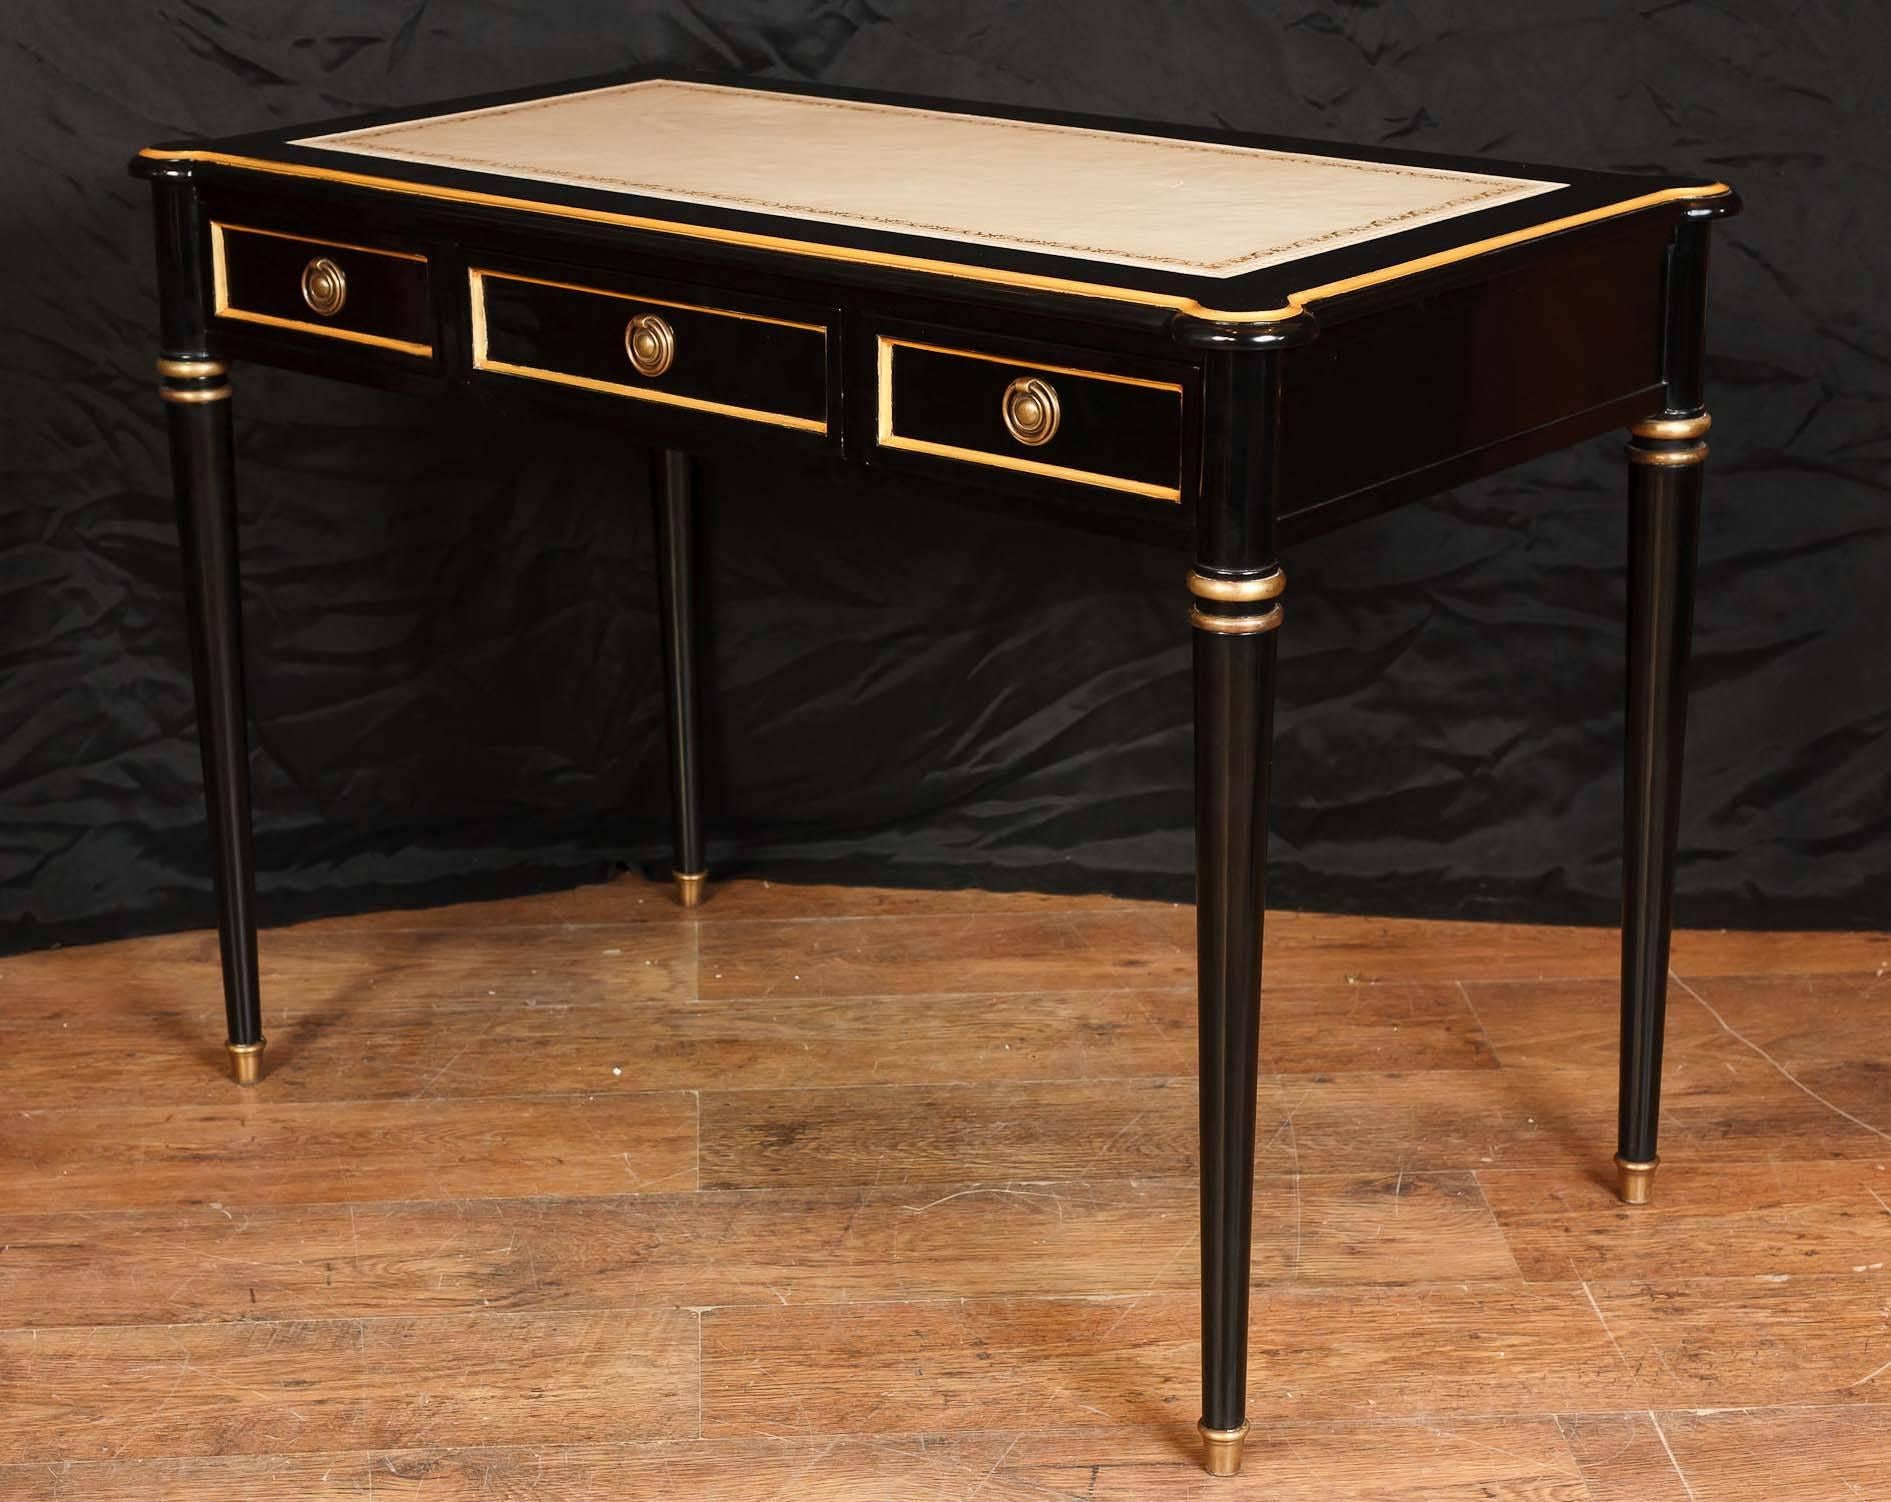 Come view this in our Canonbury antiques showroom just north of London in Potters Bar, Herts.
Stunning Regency style desk with a black lacquer finish - Love this look at the moment, black lacquer seems to be all the rage and for good reason - Black